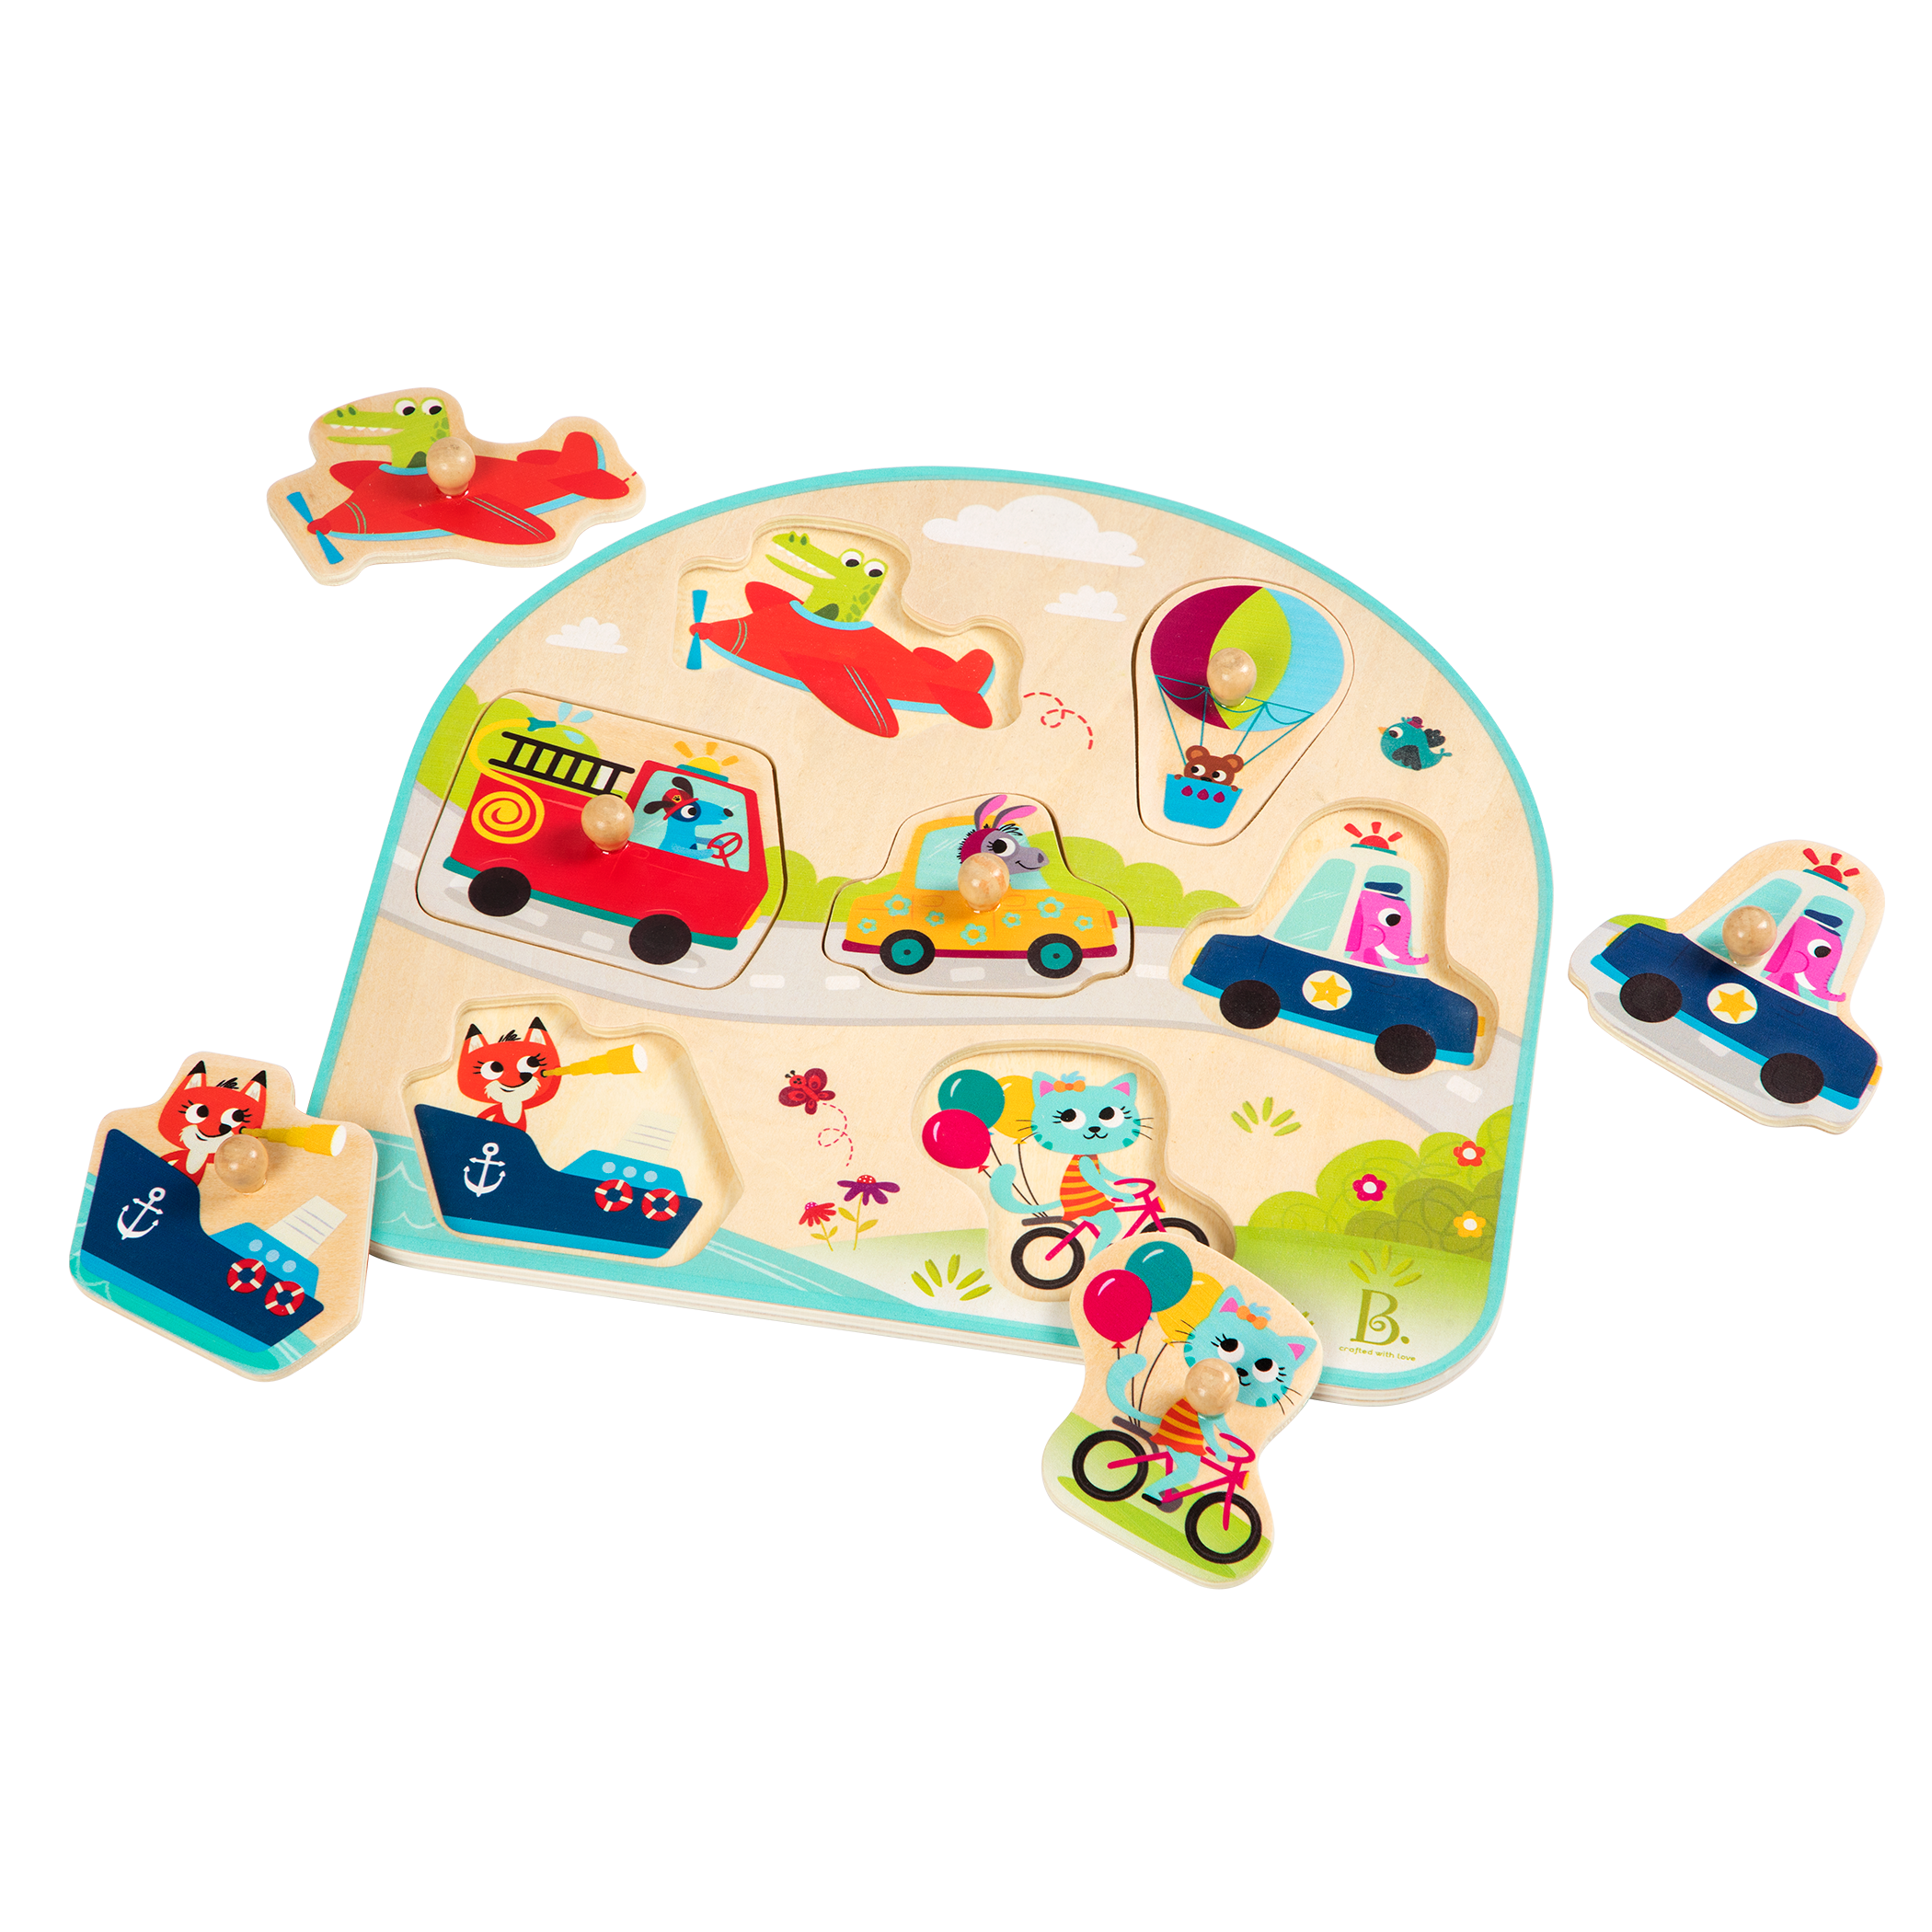 Vehicles and animals peg puzzle.